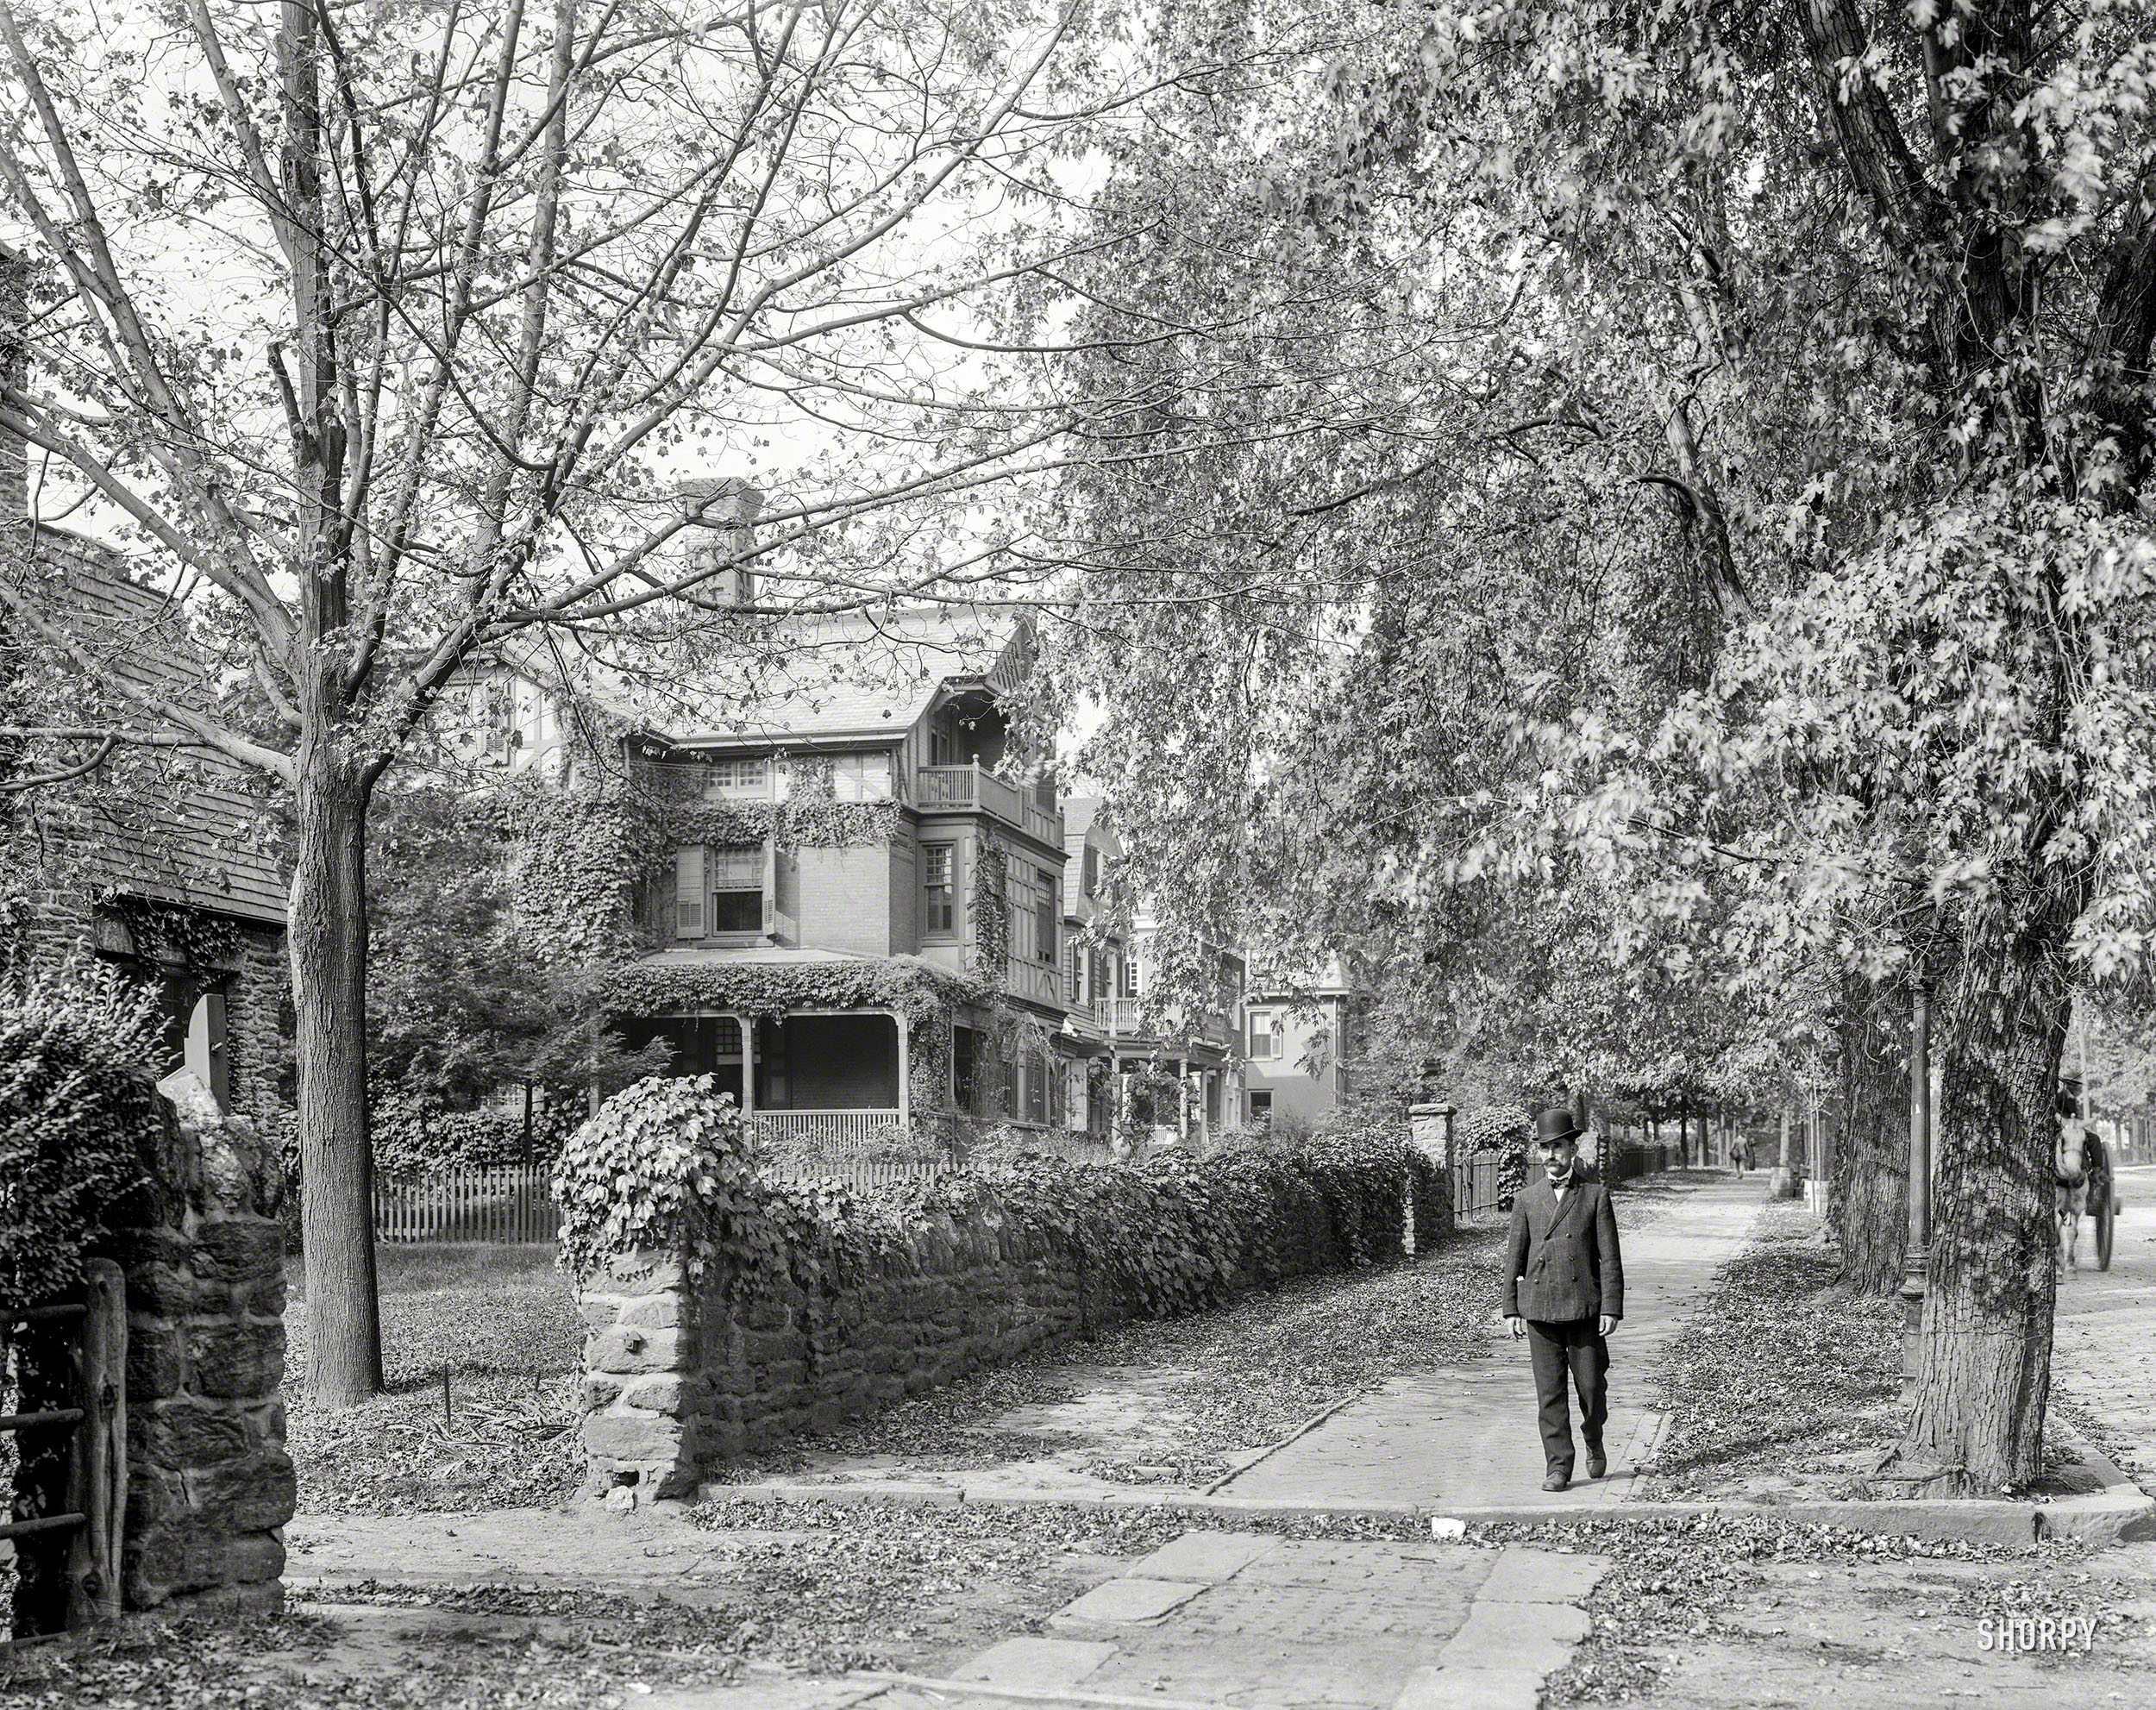 Philadelphia circa 1908. "Germantown -- Wayne Avenue." With, for all we know, Wayne himself. 8x10 inch glass negative, Detroit Publishing Co. View full size.